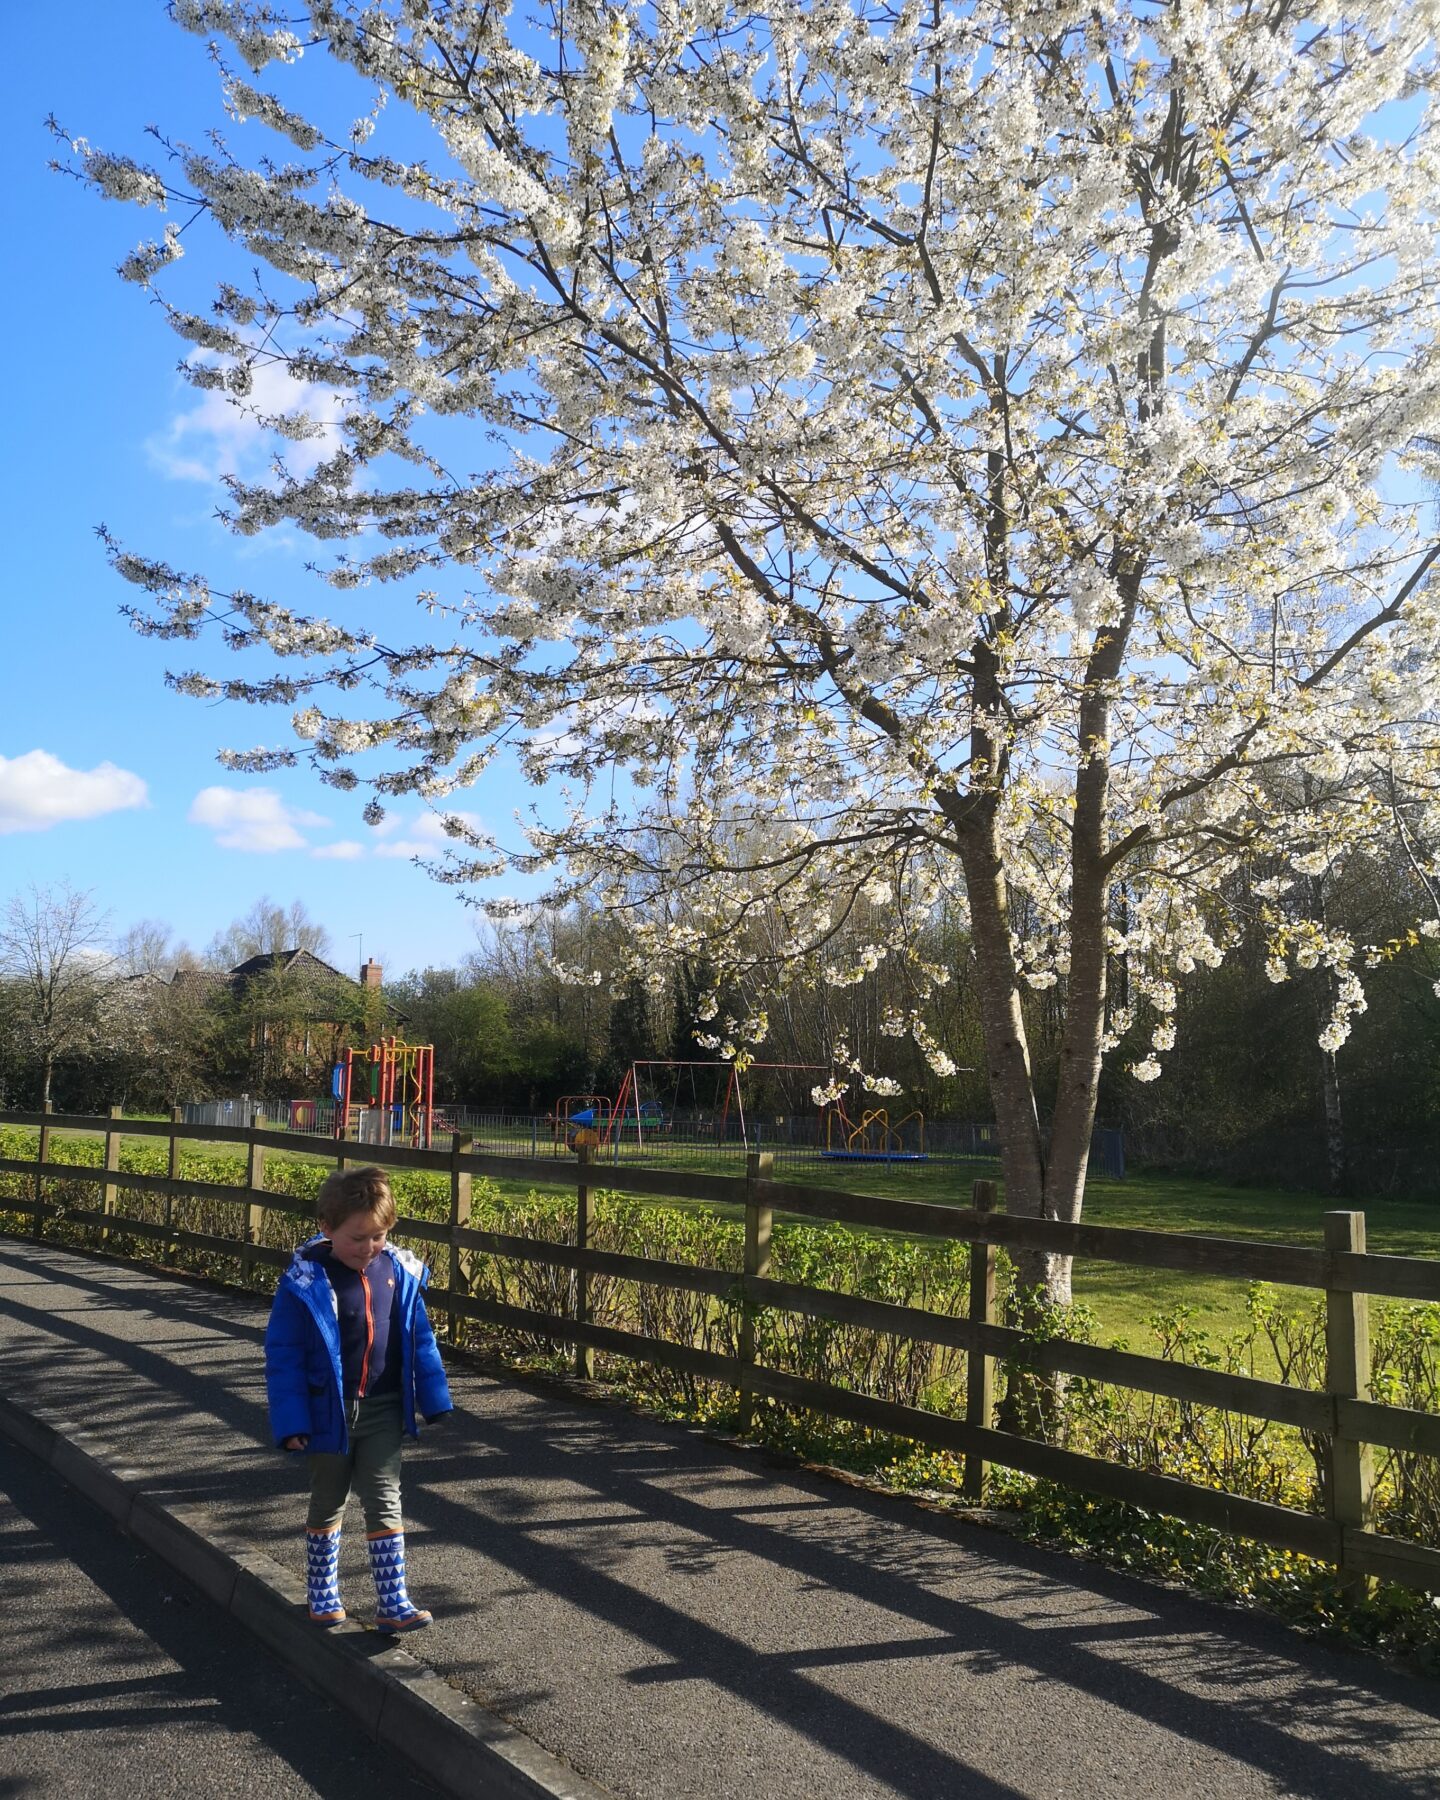 April 2021, Monthly Highlights, Life In Kent, Family Days out, the Frenchie Mummy